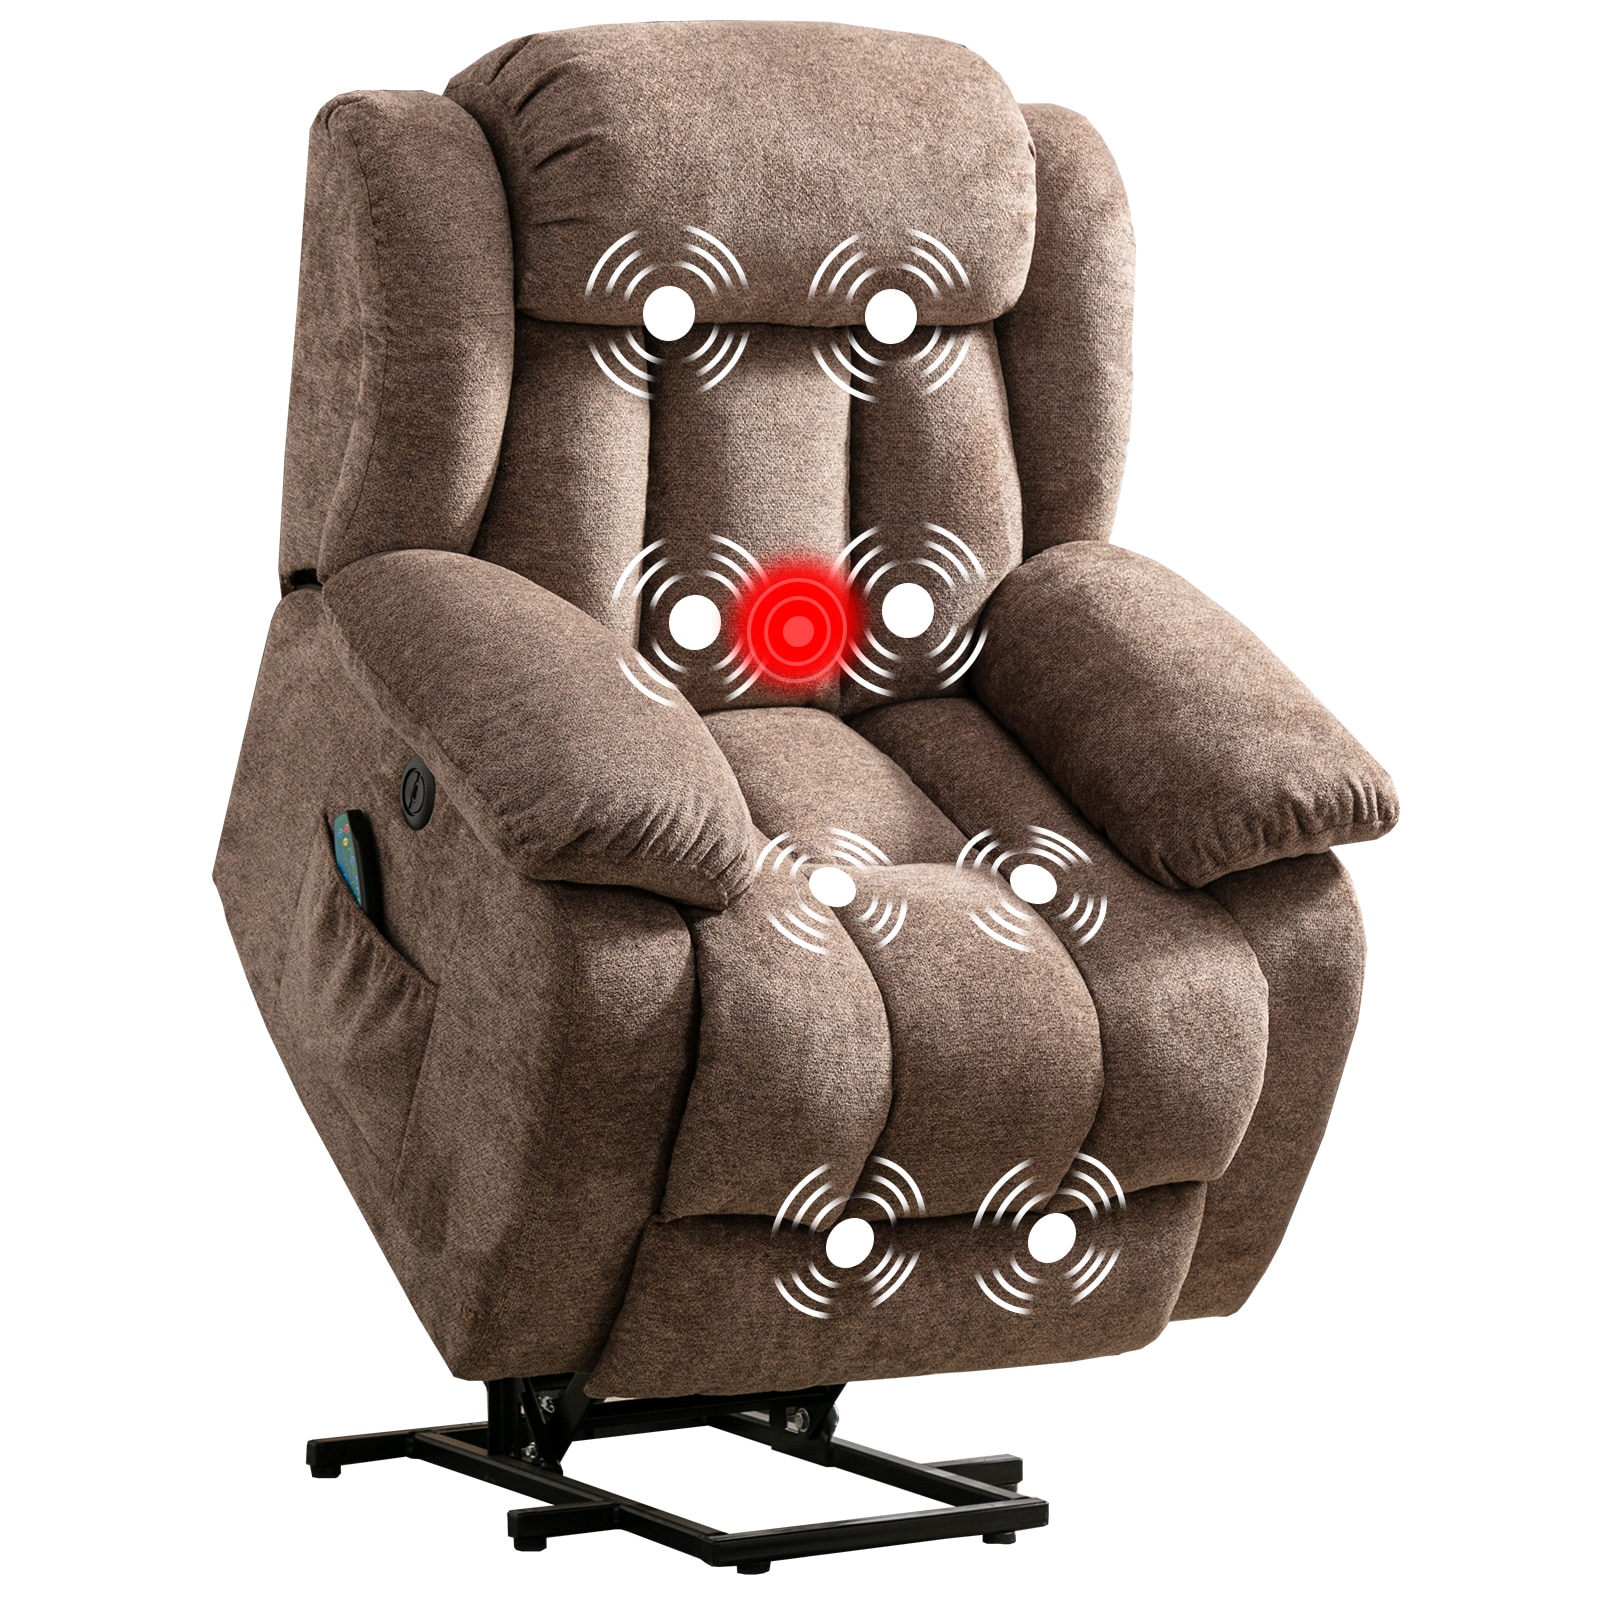 Power Lift Massage Recliner Camel Velvet Powered Reclining Massage Chair with Lift Assistance in Off-White | - Canmov CD0516GF21D-D276